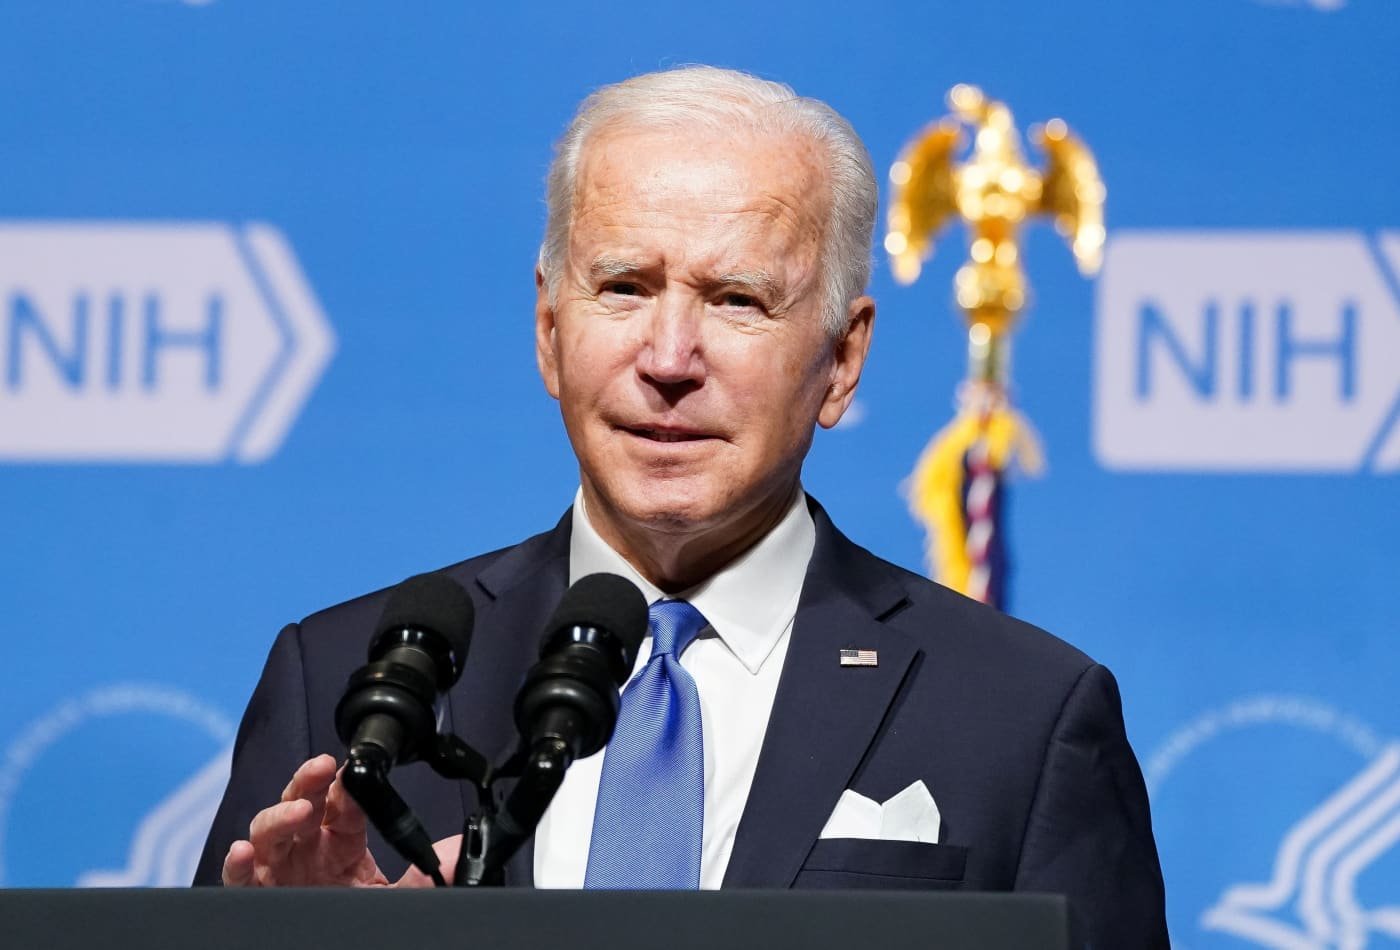 Biden says he doesn't want lockdowns and won't expand vaccine mandates to fight Covid this winter